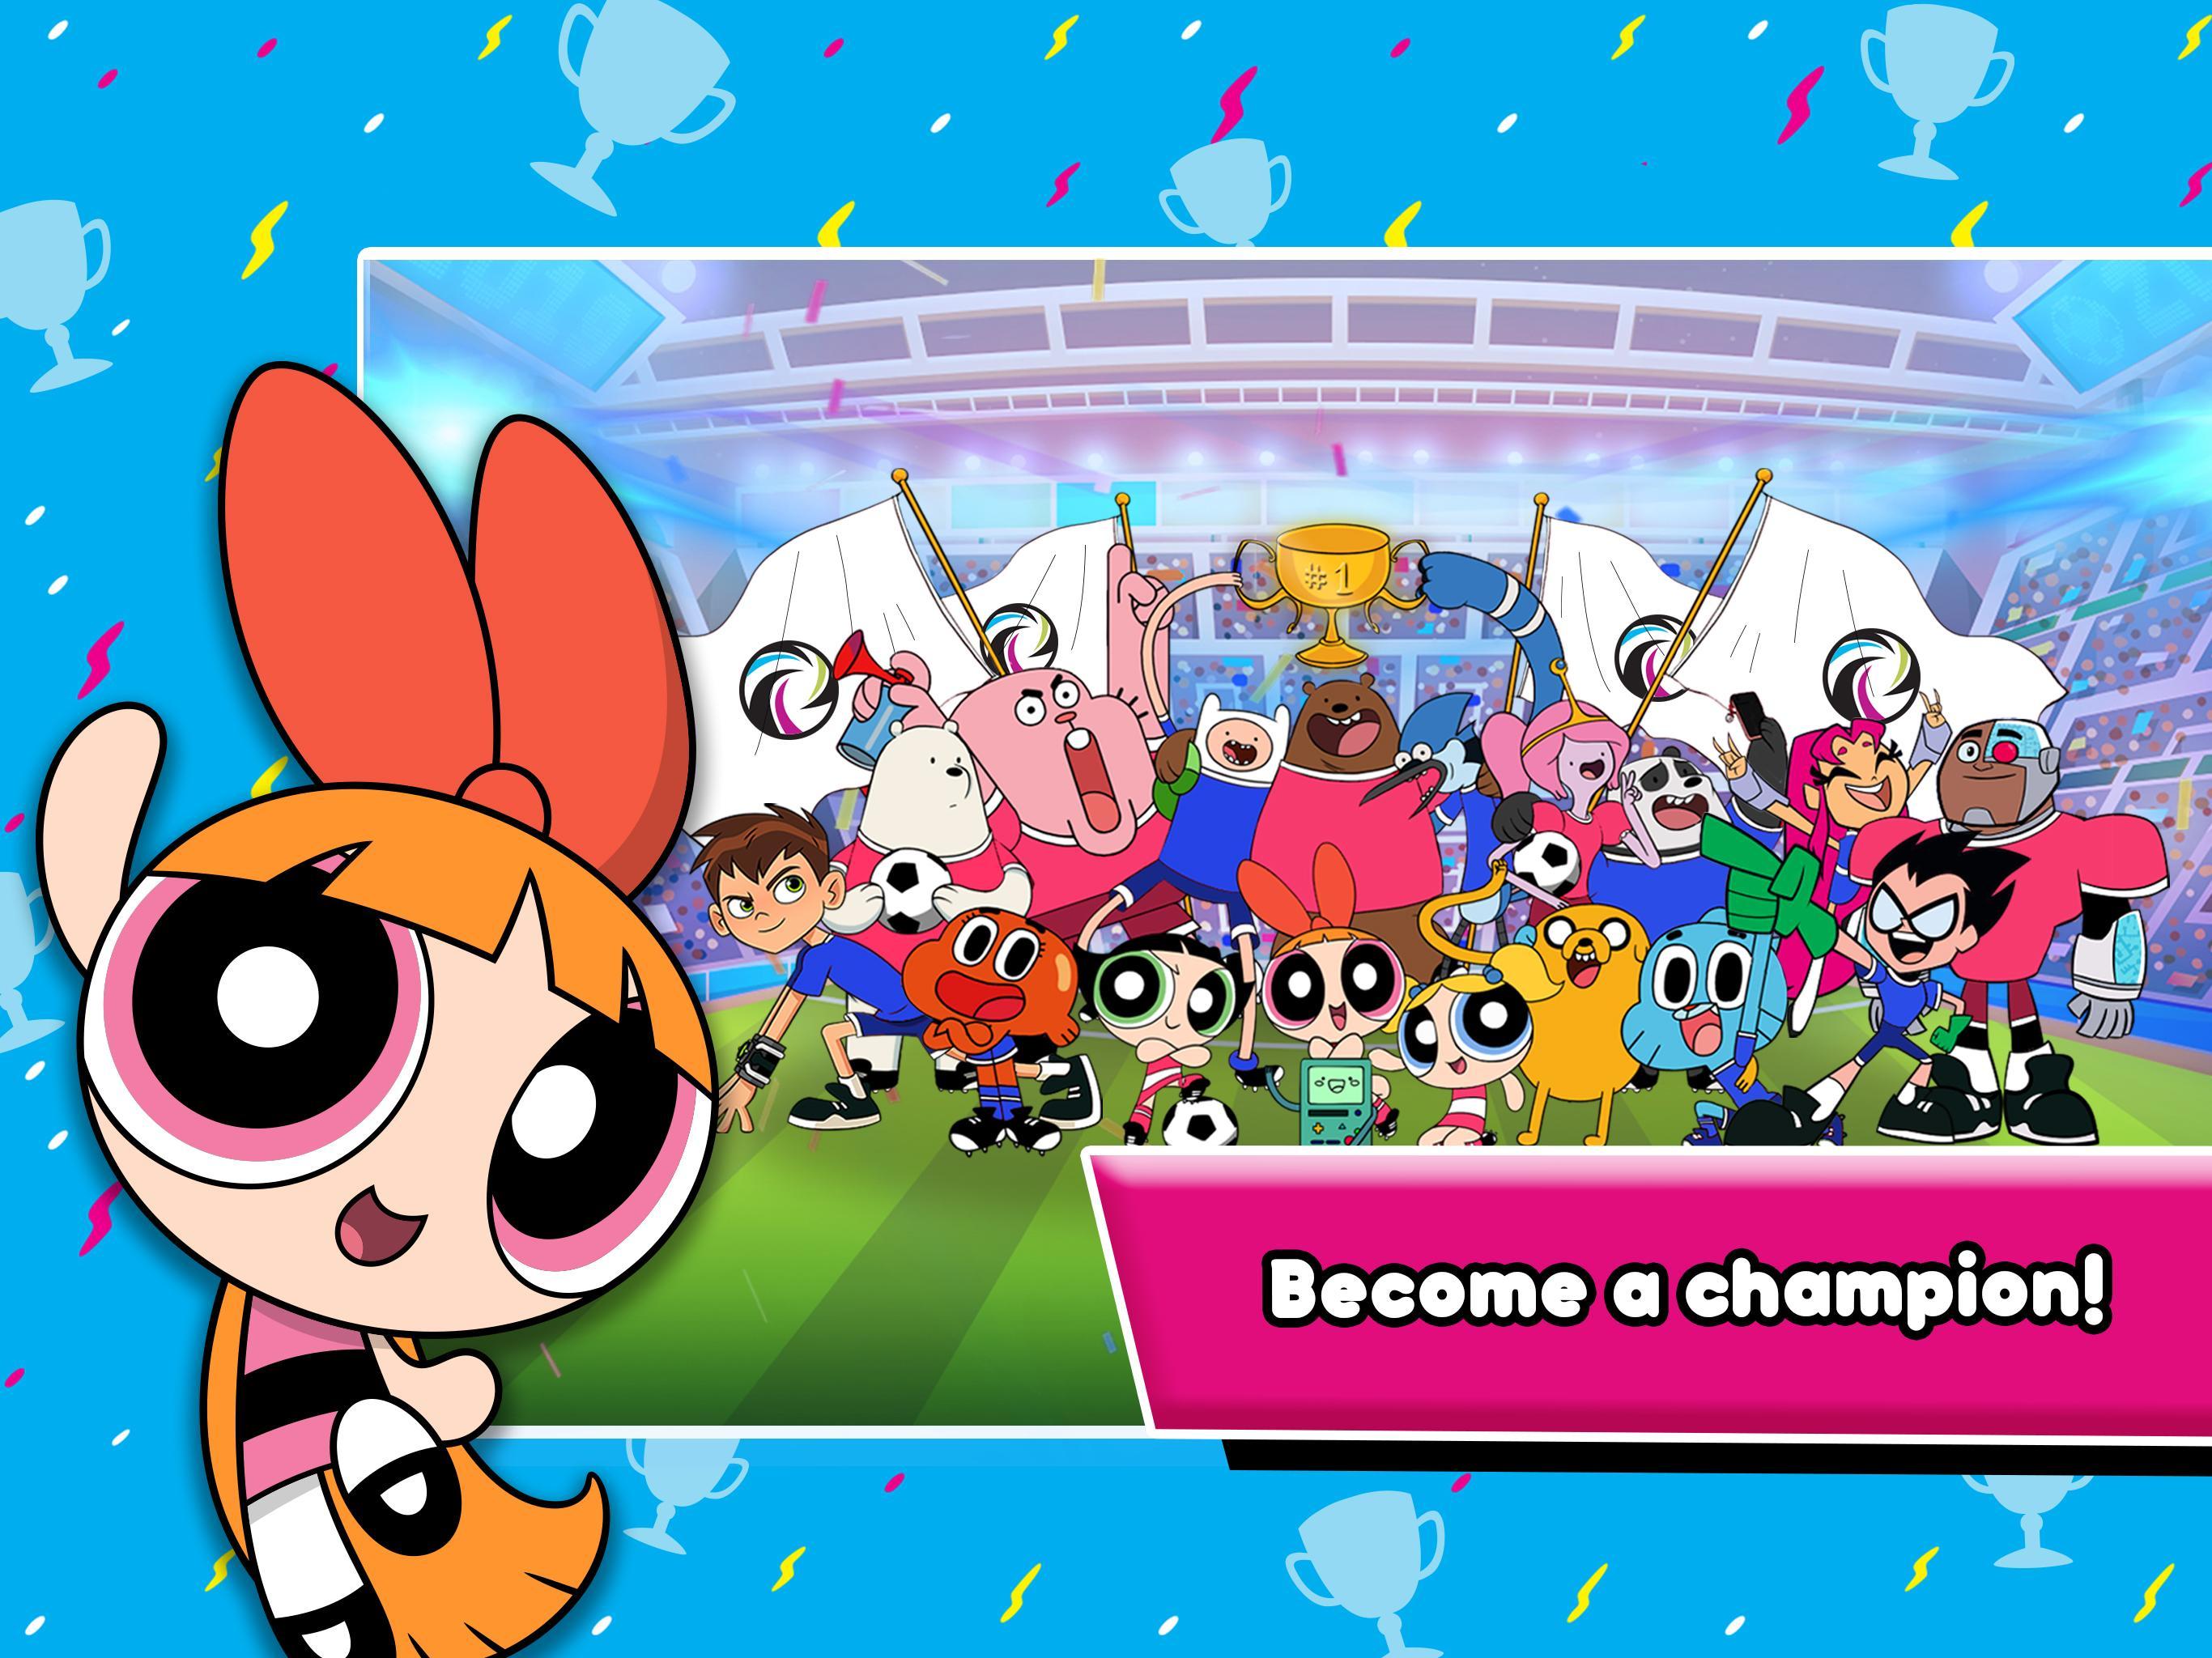 Toon Cup Cartoon Network’s Soccer Game for Android APK Download